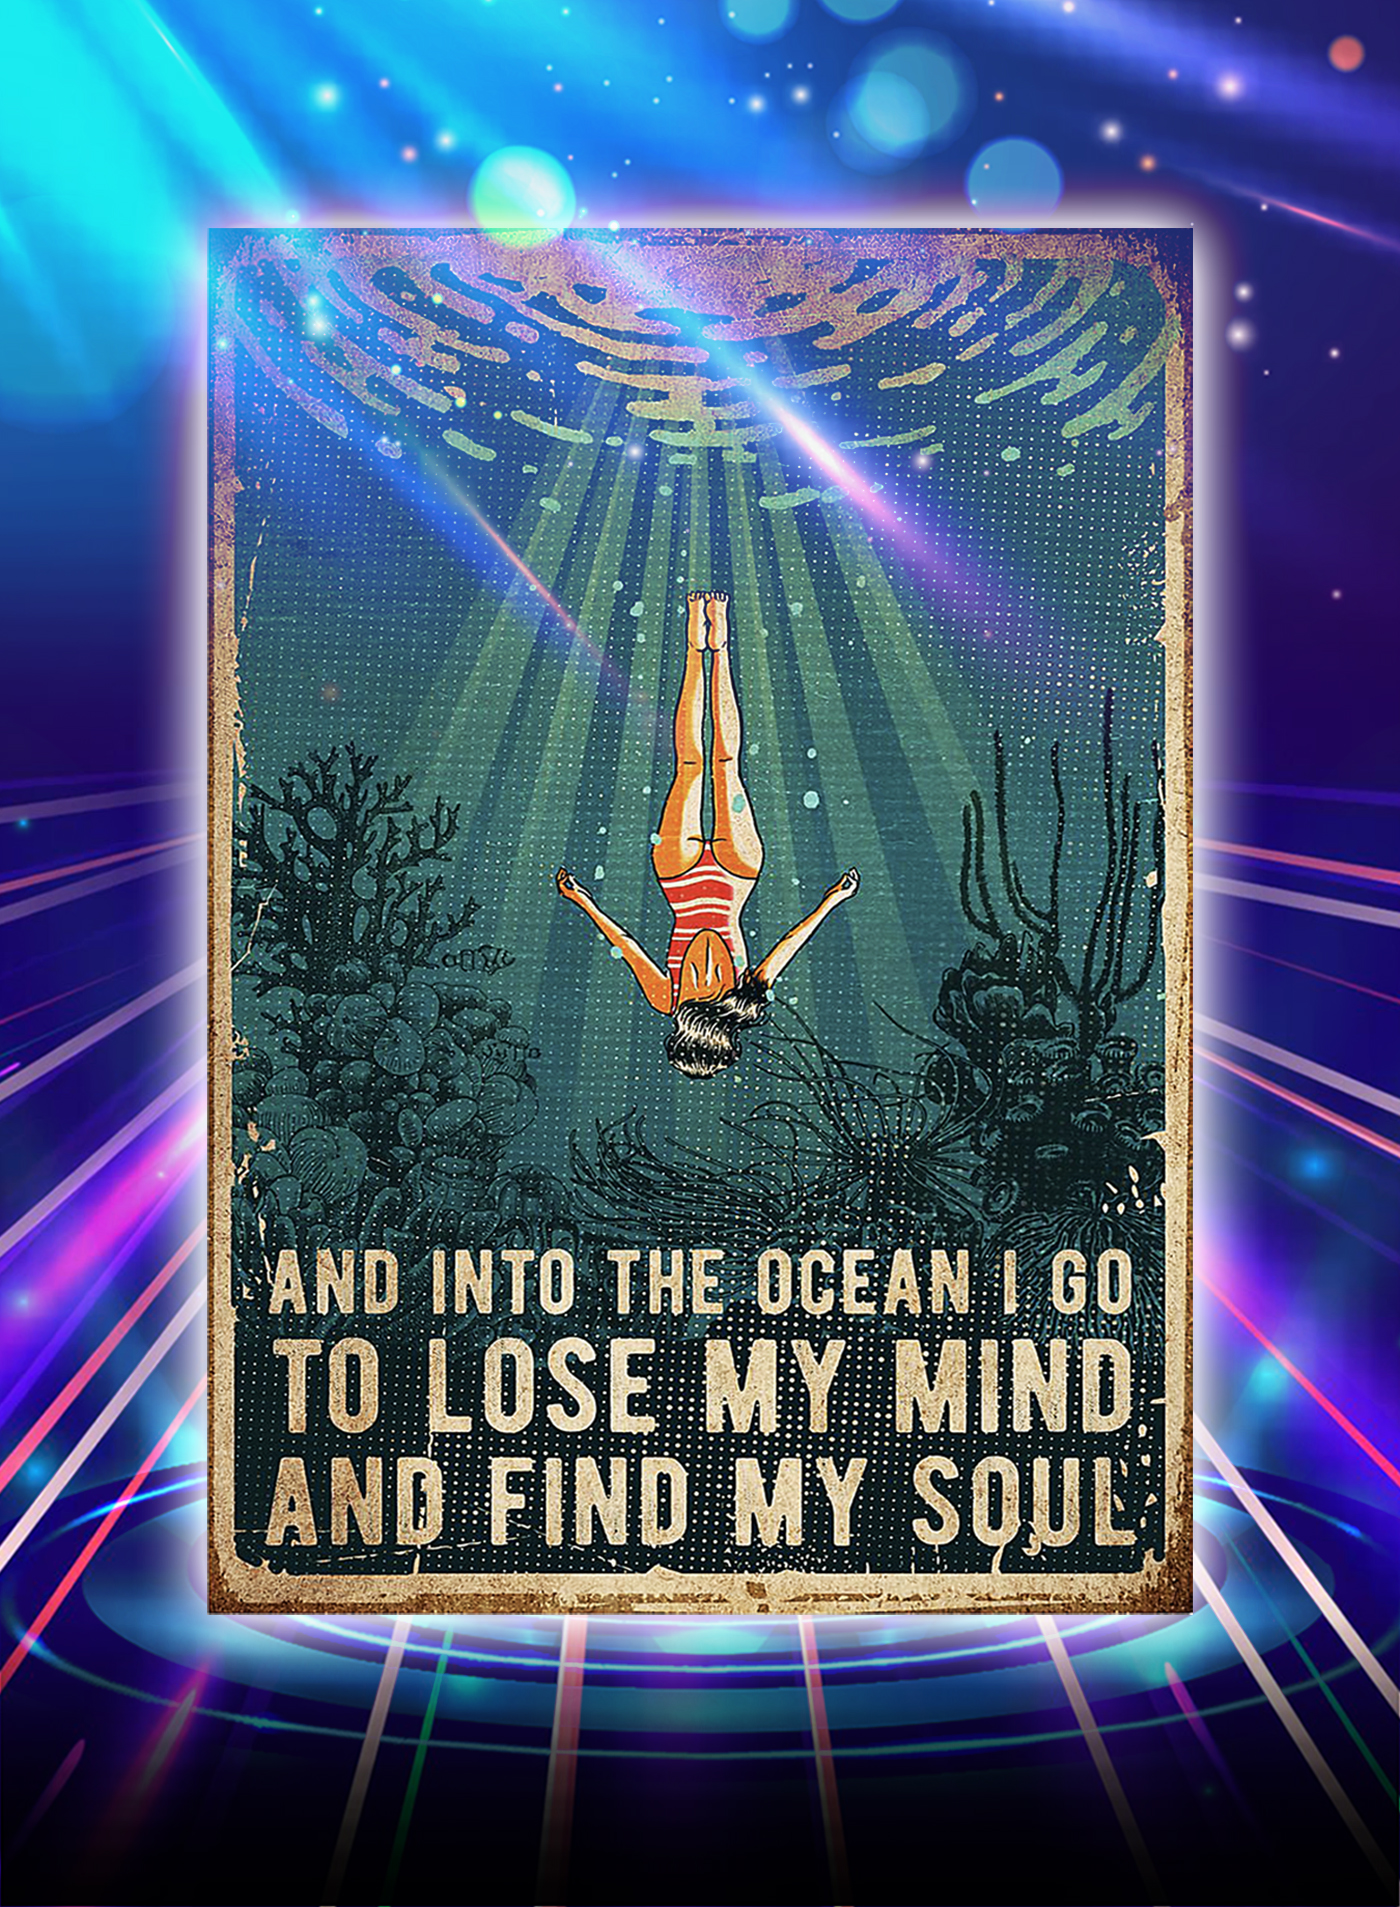 Swimming And into the ocean i go to lose my mind and find my soul poster - A1